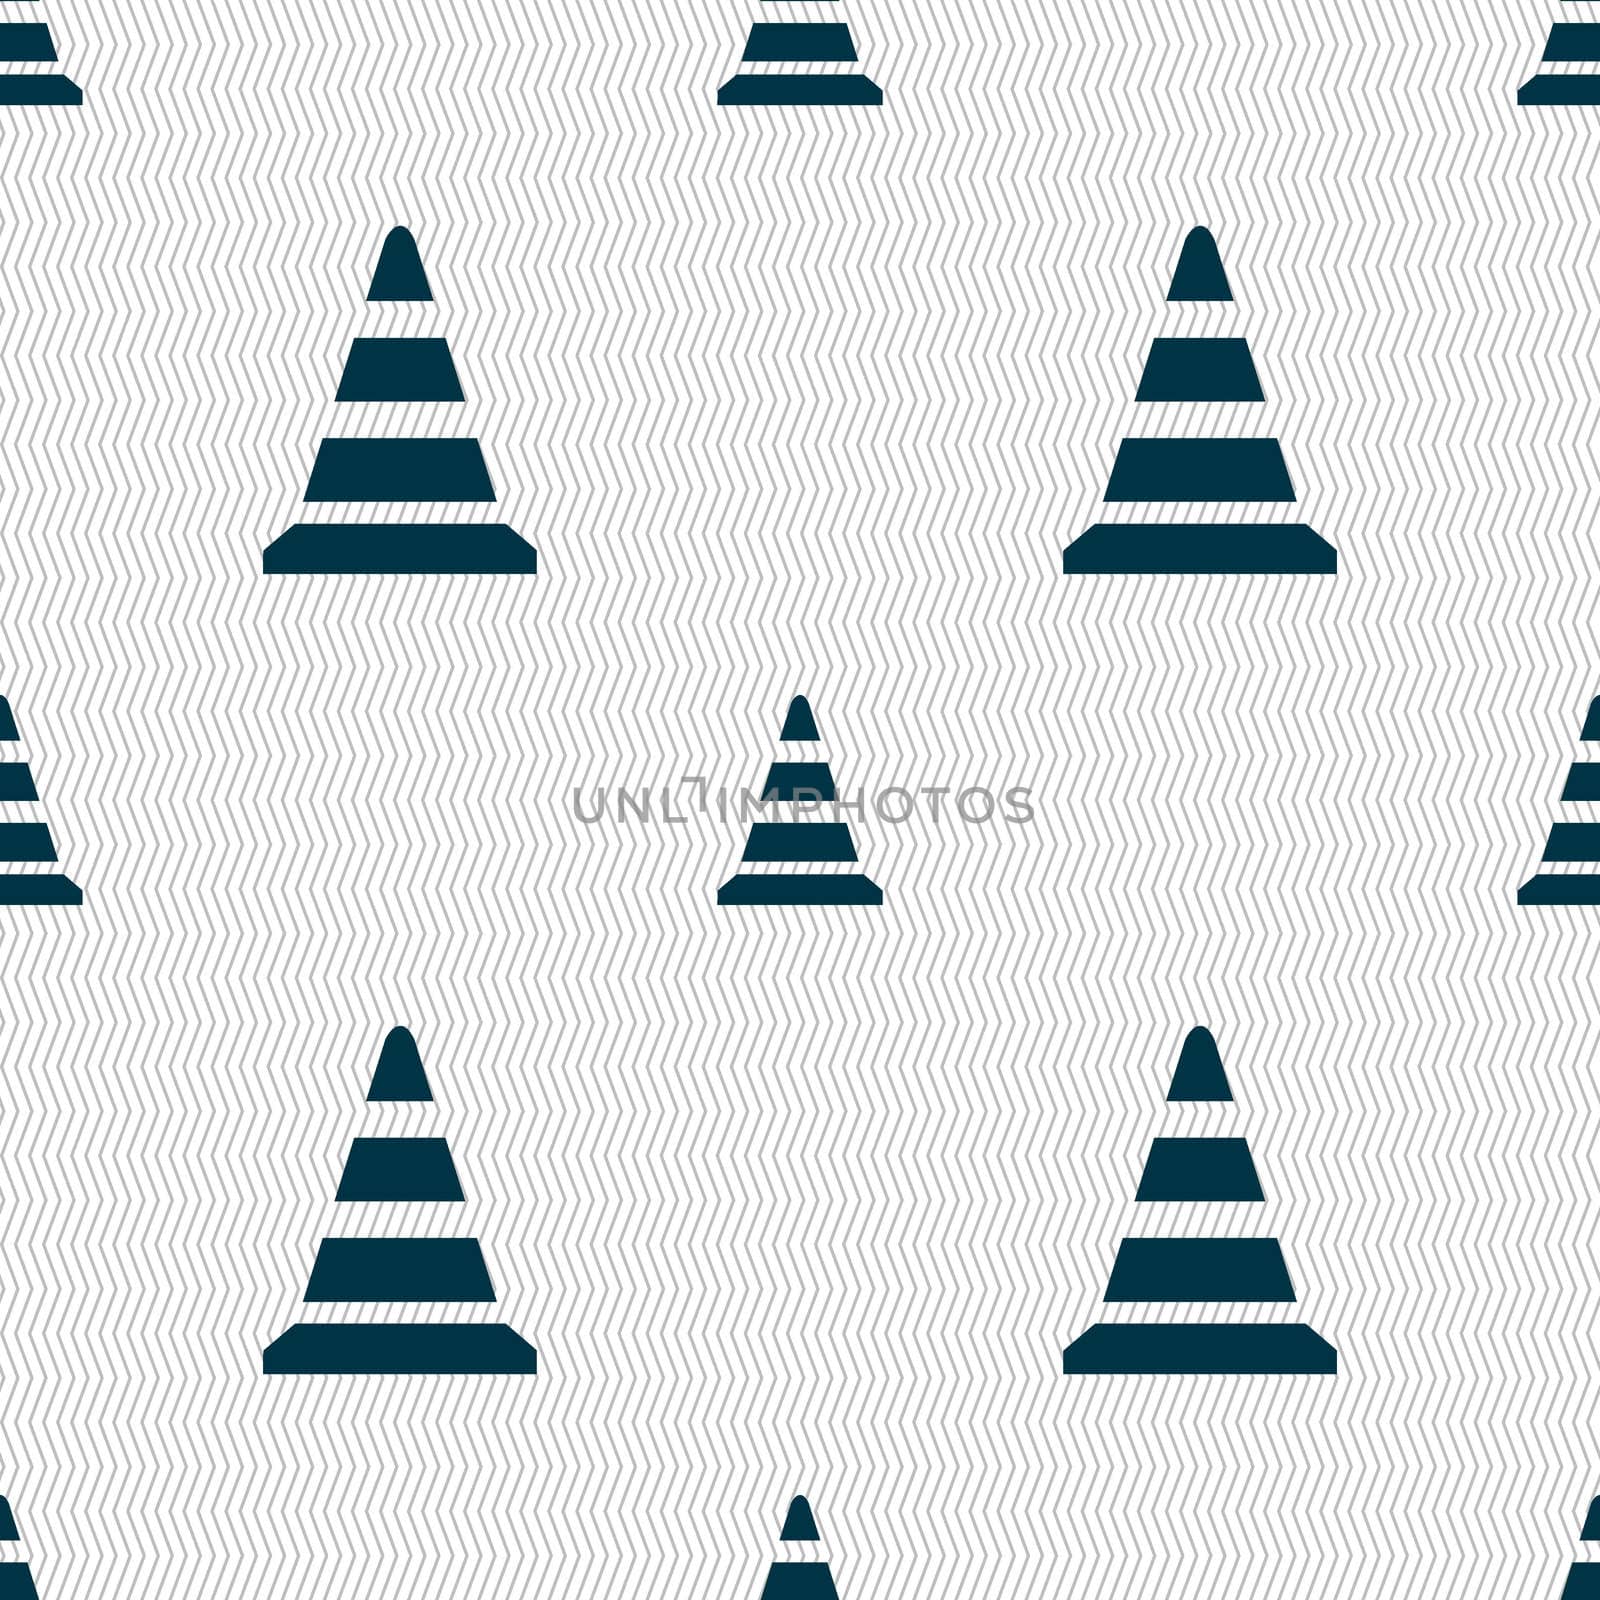 road cone icon. Seamless abstract background with geometric shapes. illustration